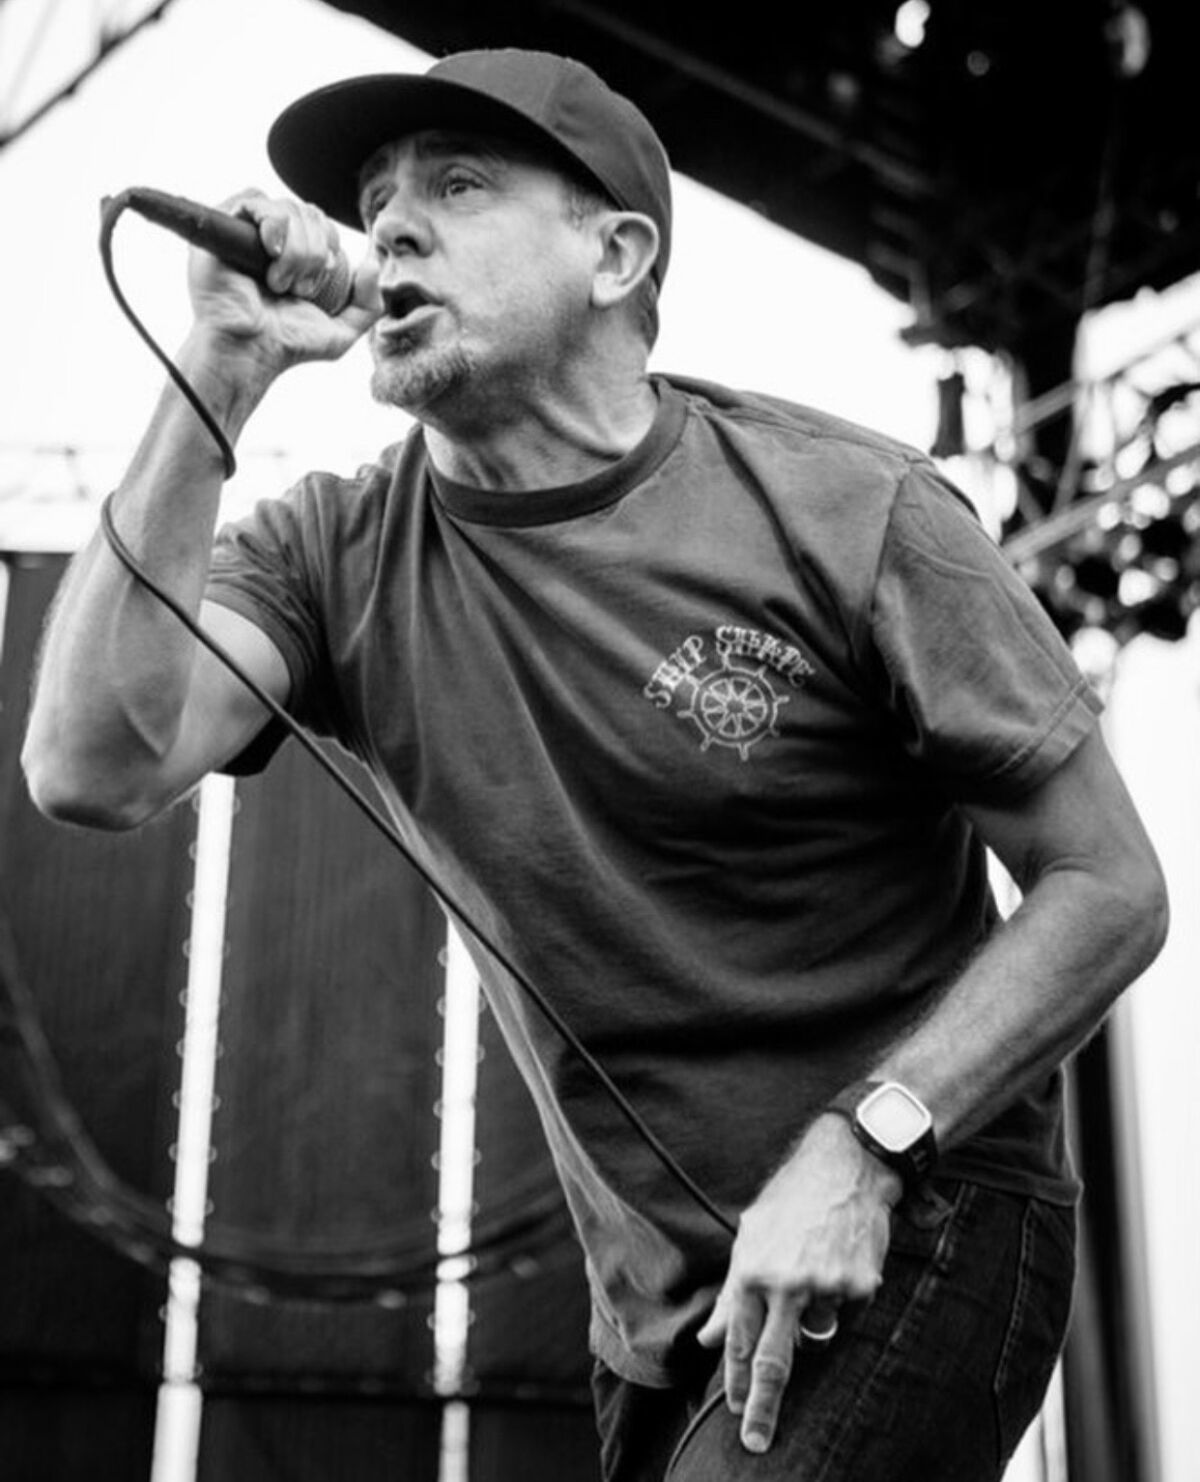 Jim Lindberg, the lead singer of Pennywise, co-wrote Bro Hymn with his bandmates.